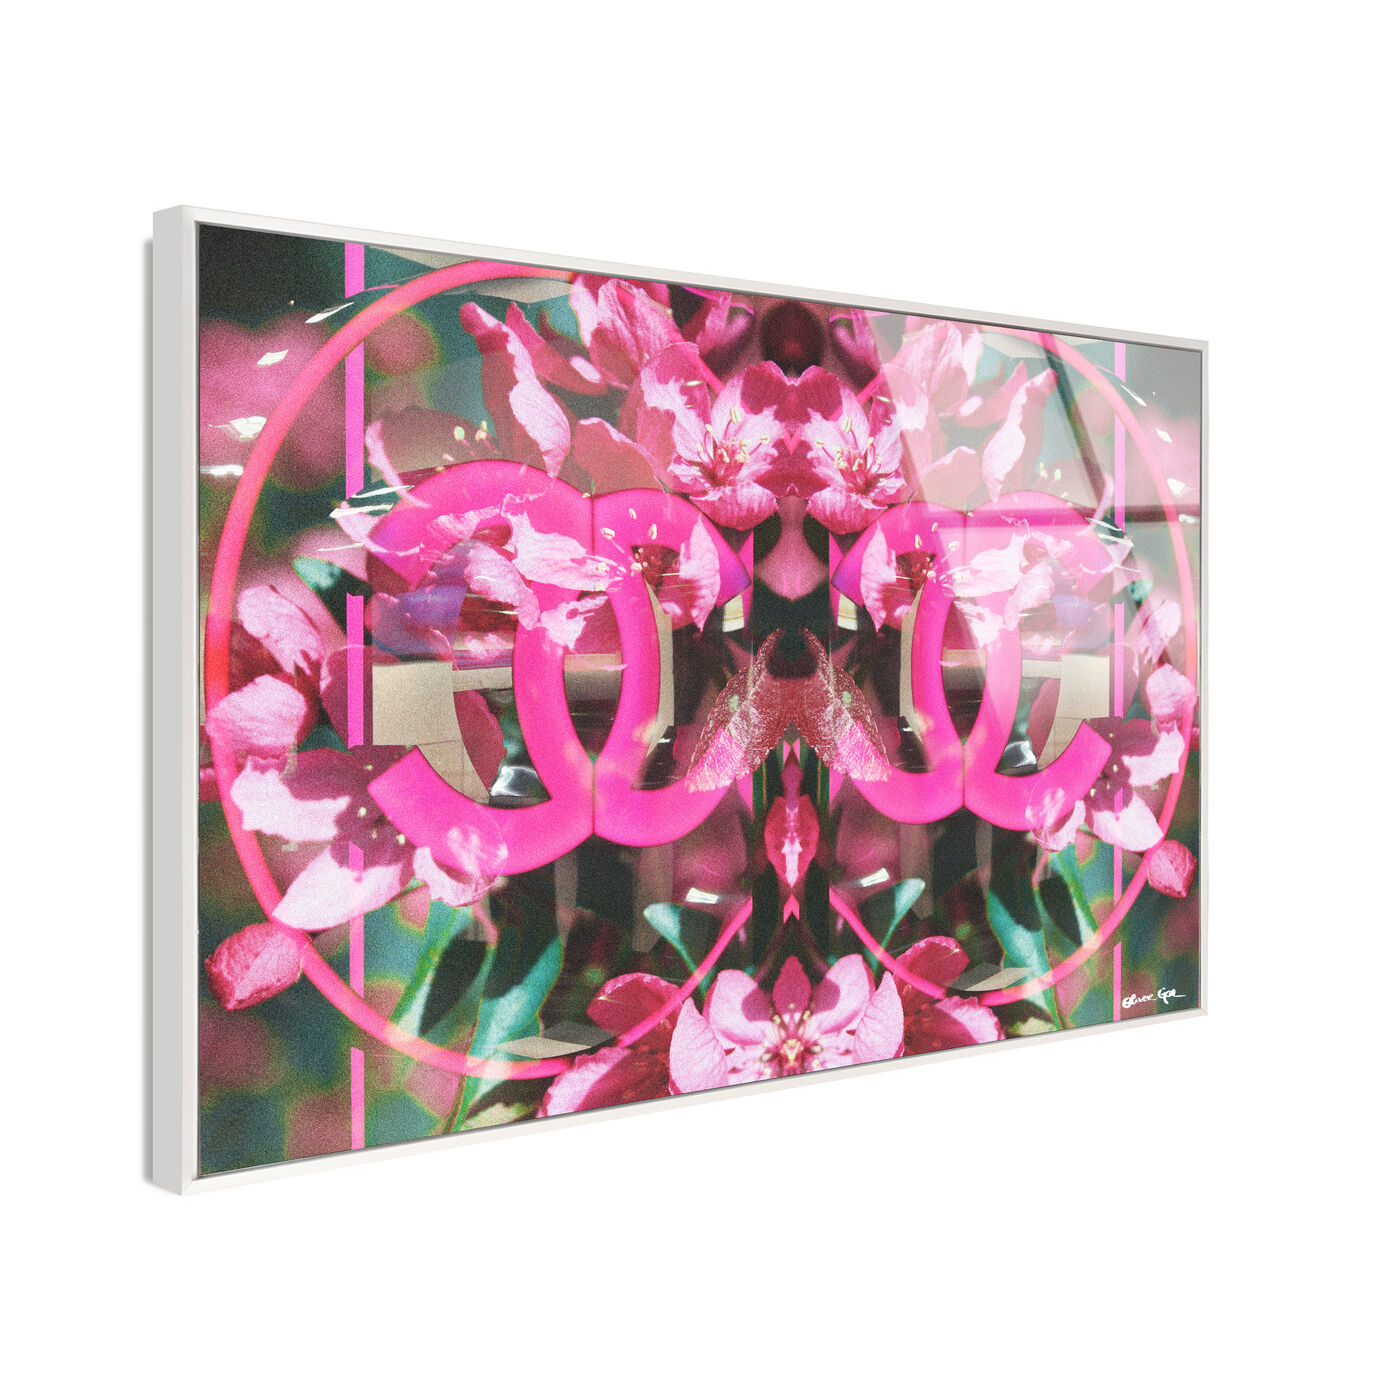 Double Blooming Fashion - Framed Acrylic Art